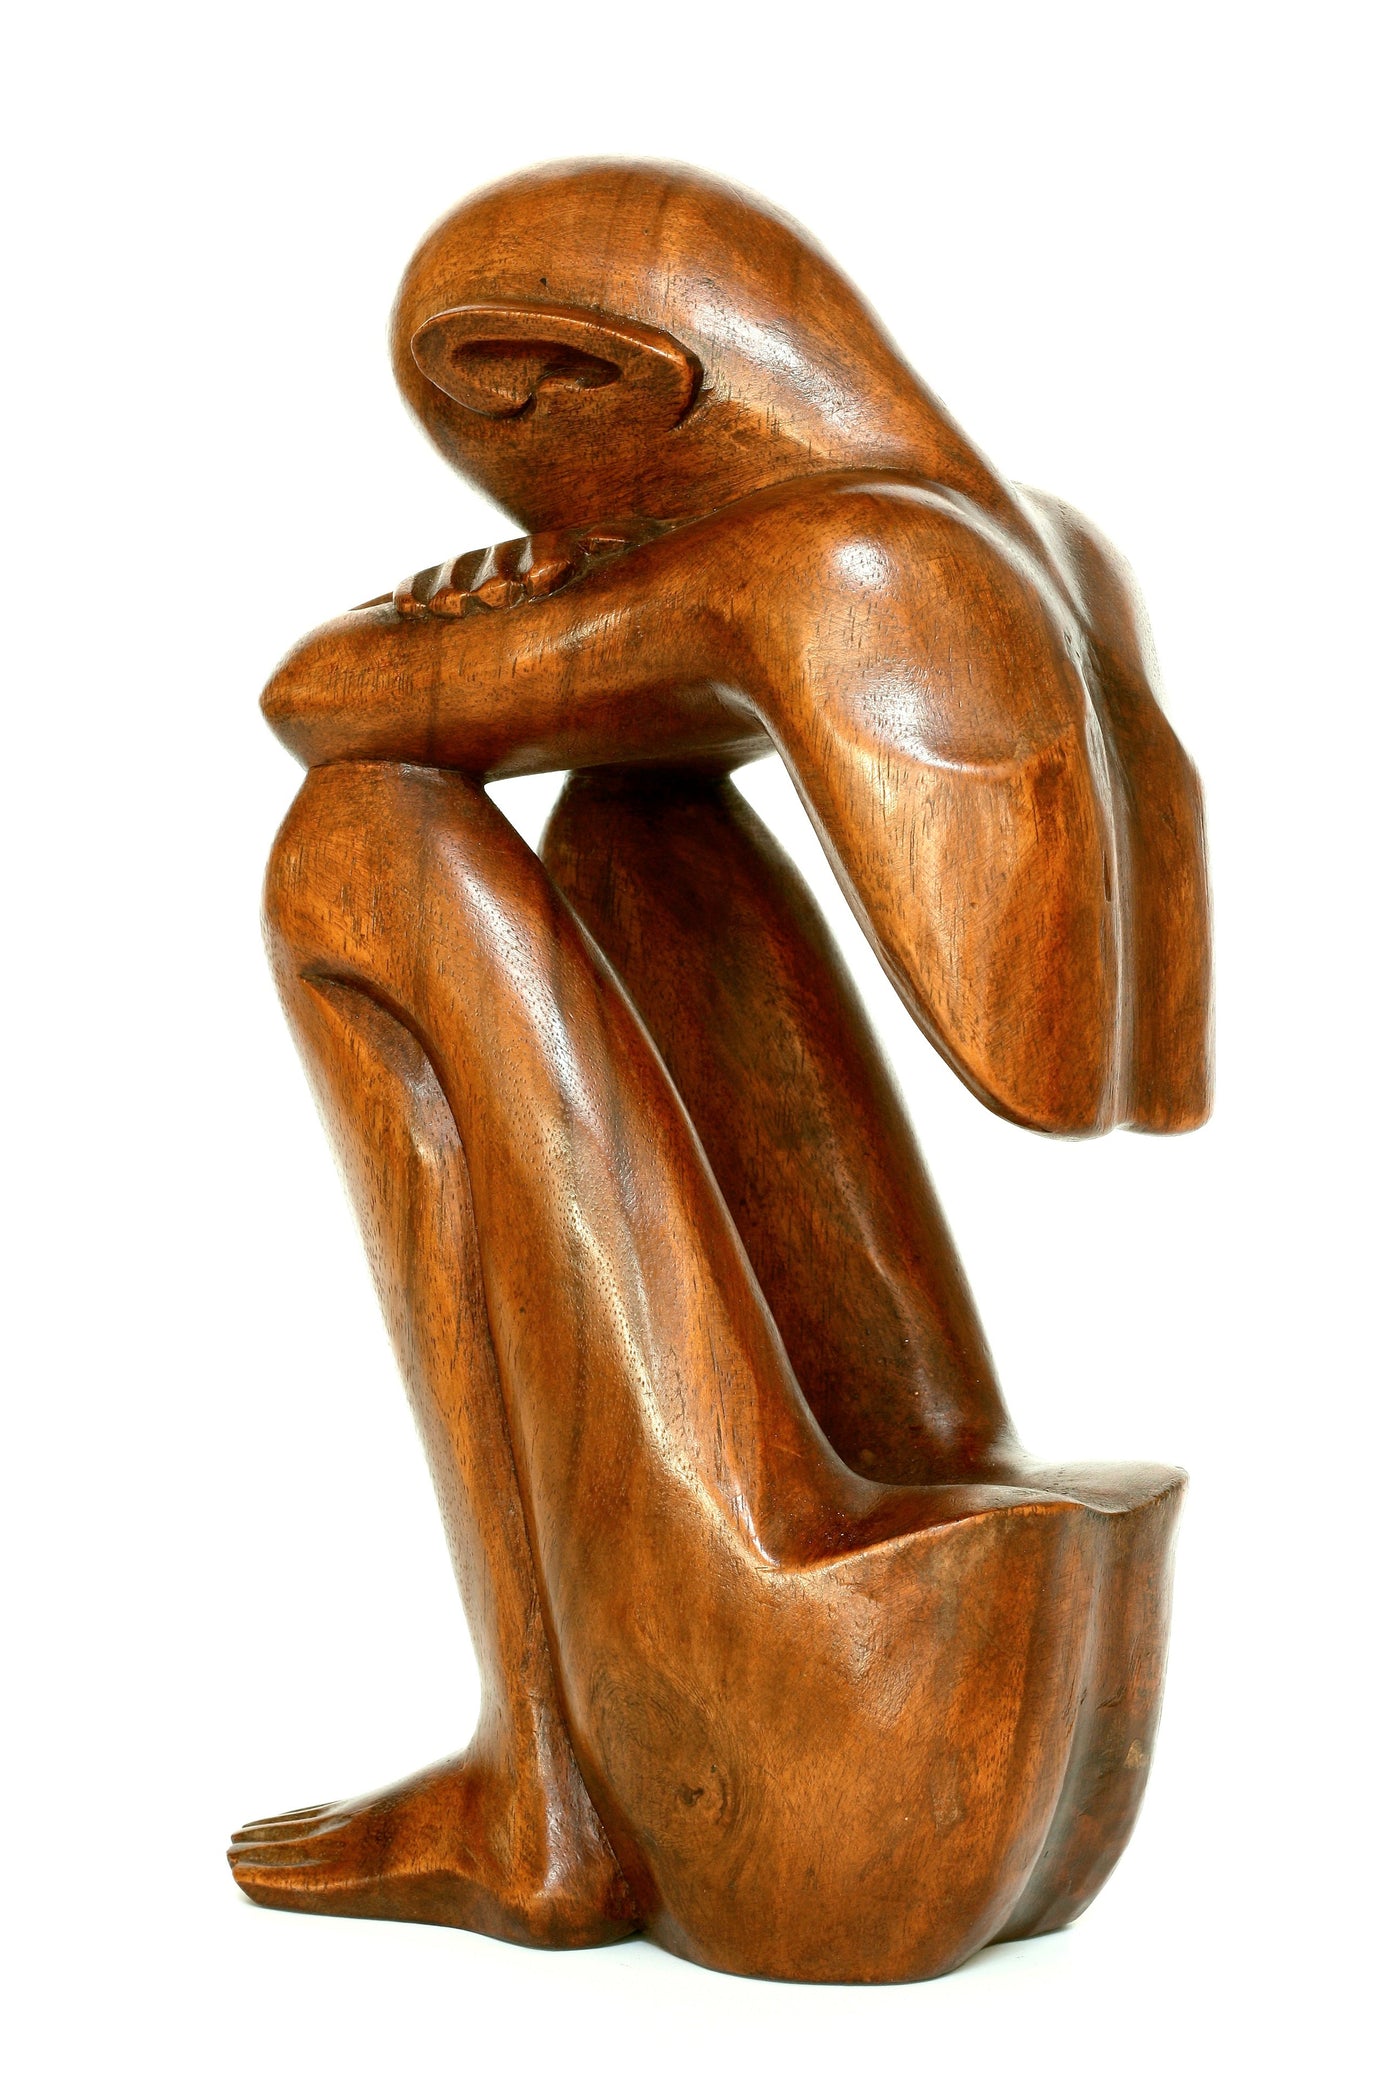 12" Wooden Handmade Abstract Sculpture Handcrafted "Resting Man" Home Decor Decorative Figurine Accent Decoration Hand Carved Statue